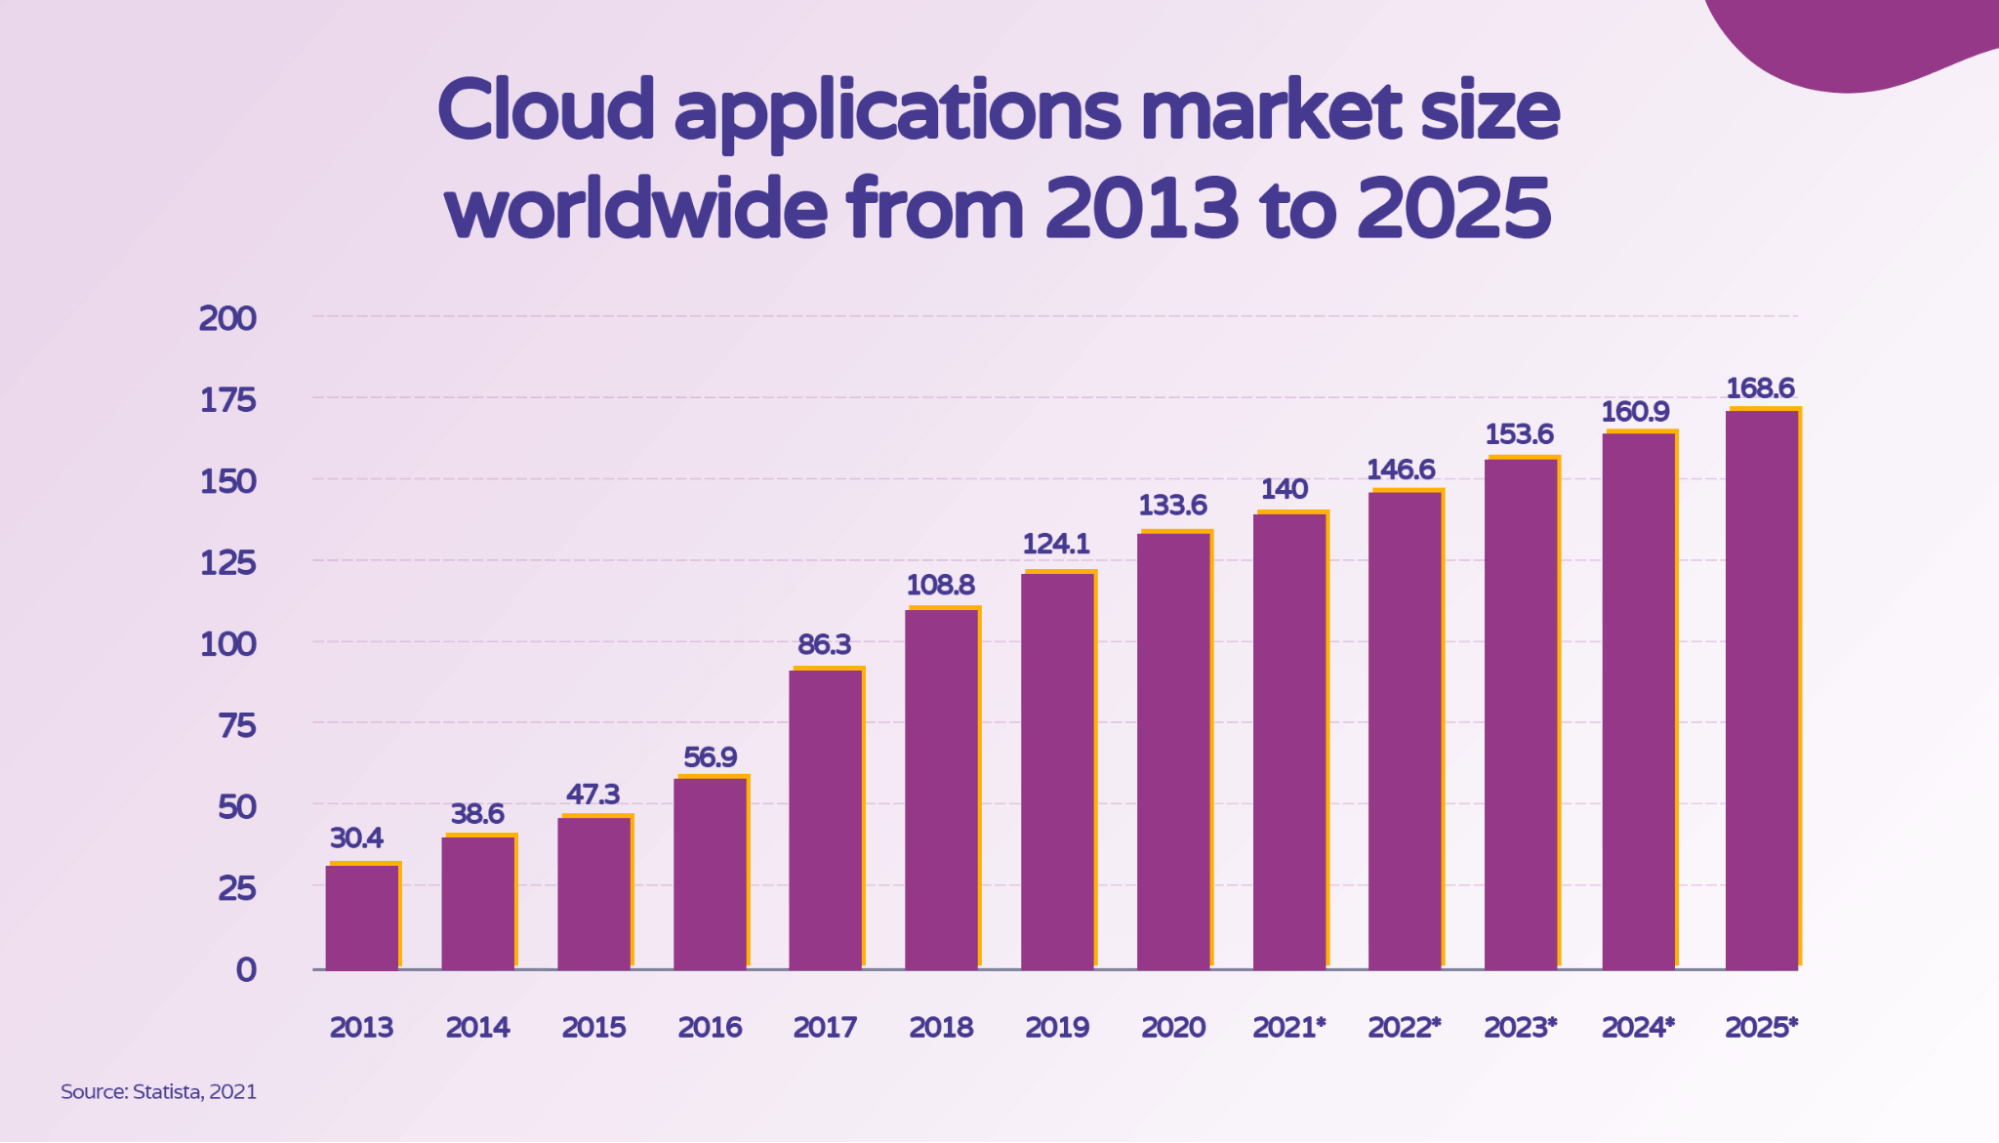 Graph showing cloud applications market size worldwide from 2013 to 2025